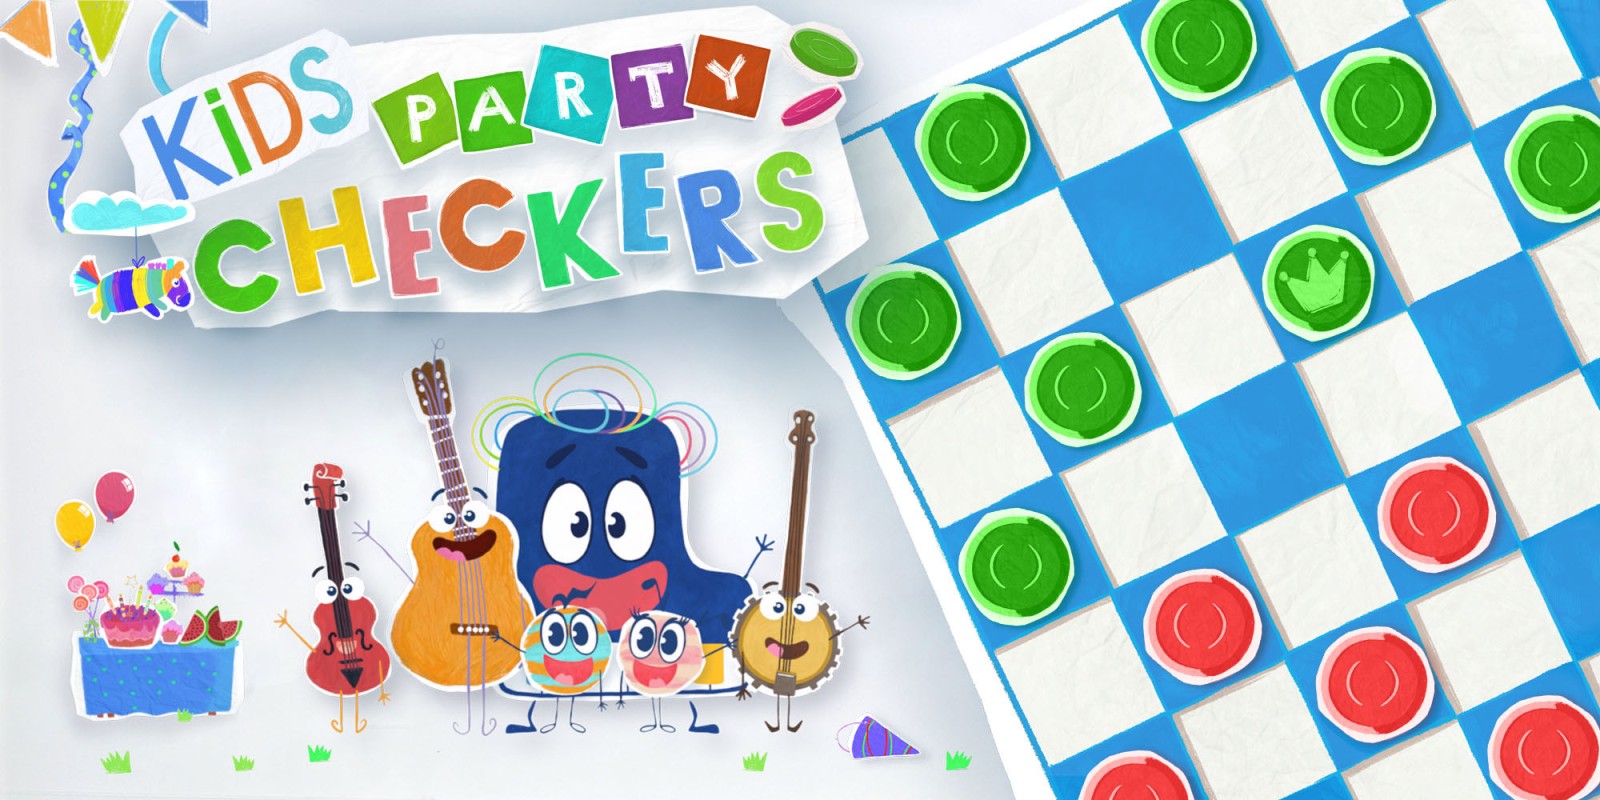 Kids Party Checkers